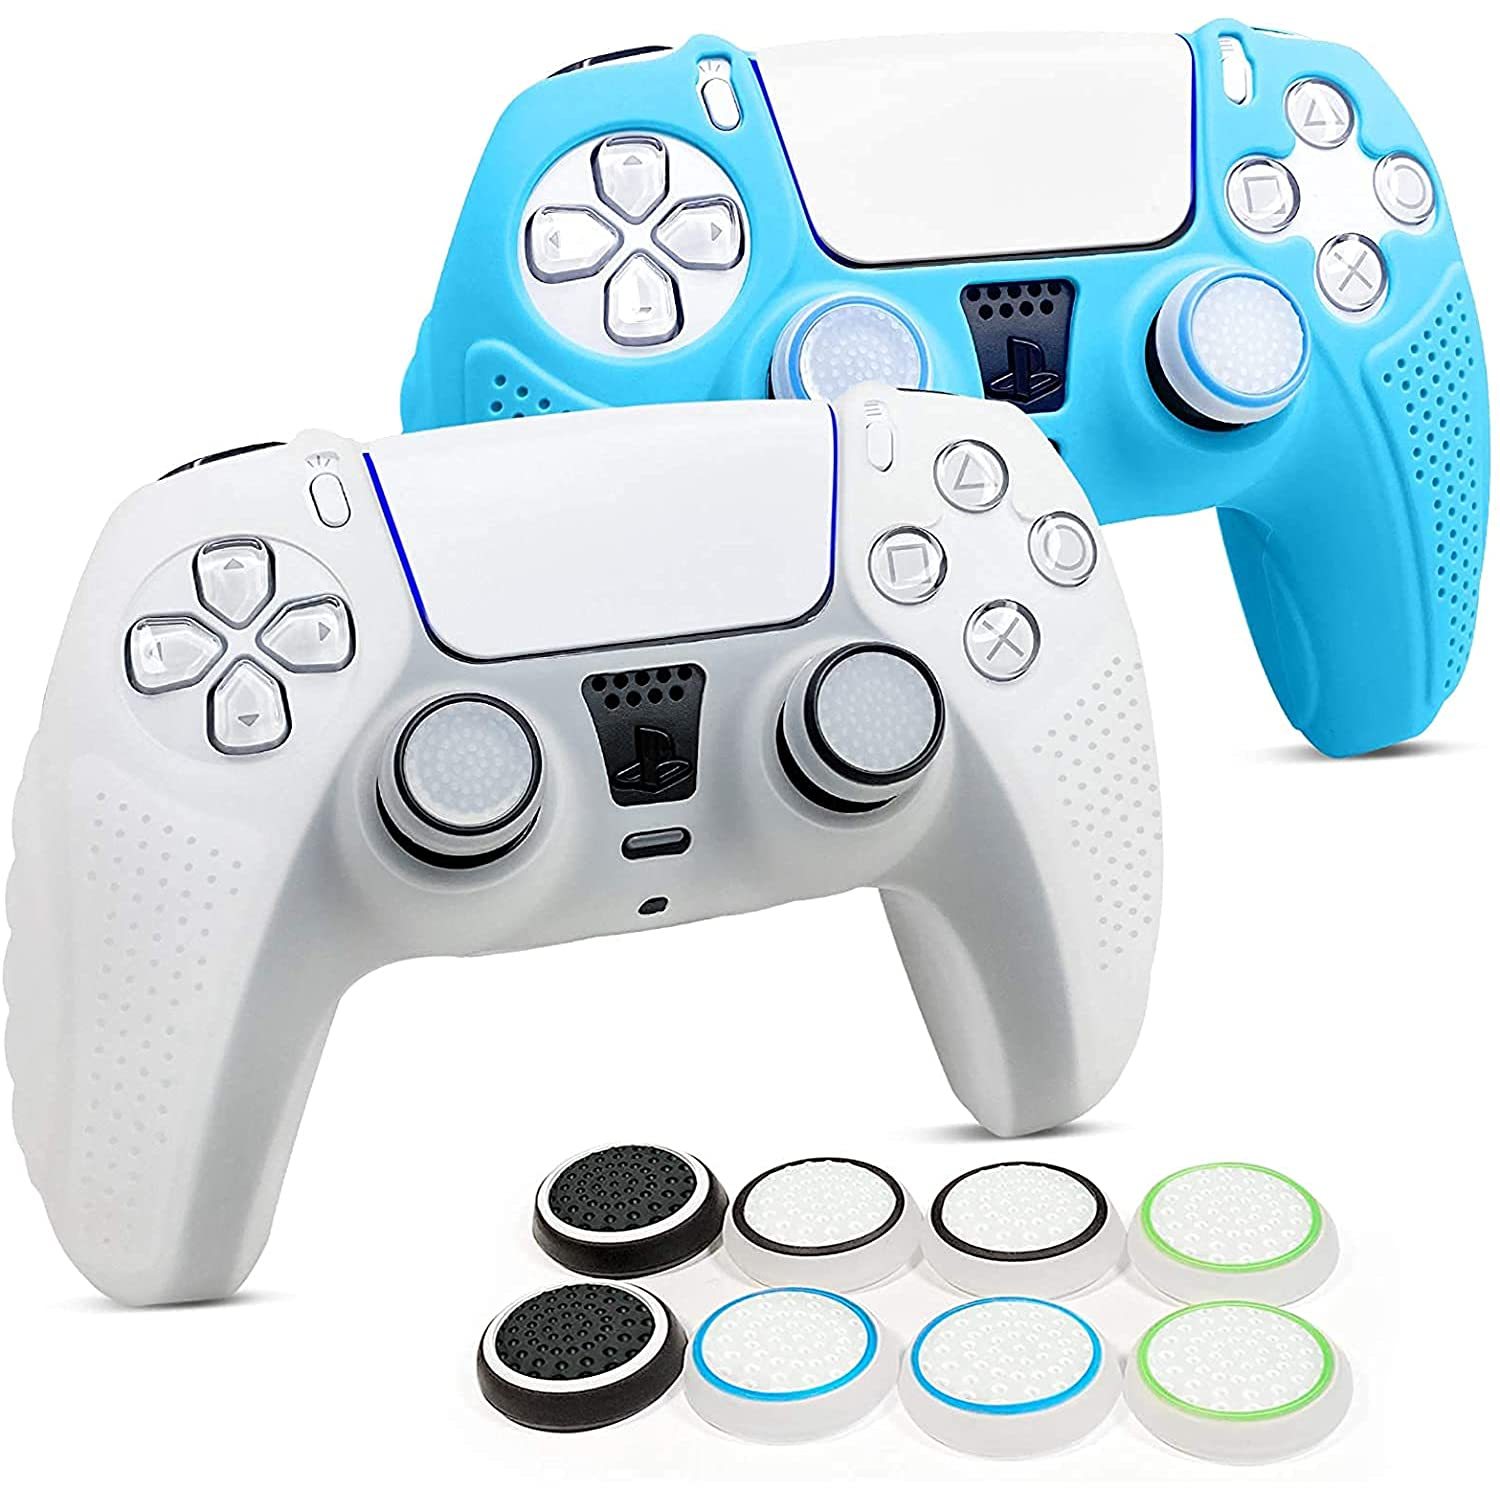 Ps5 Controller Cover X2, Anti-Slip Silicone Protective Cover Case For